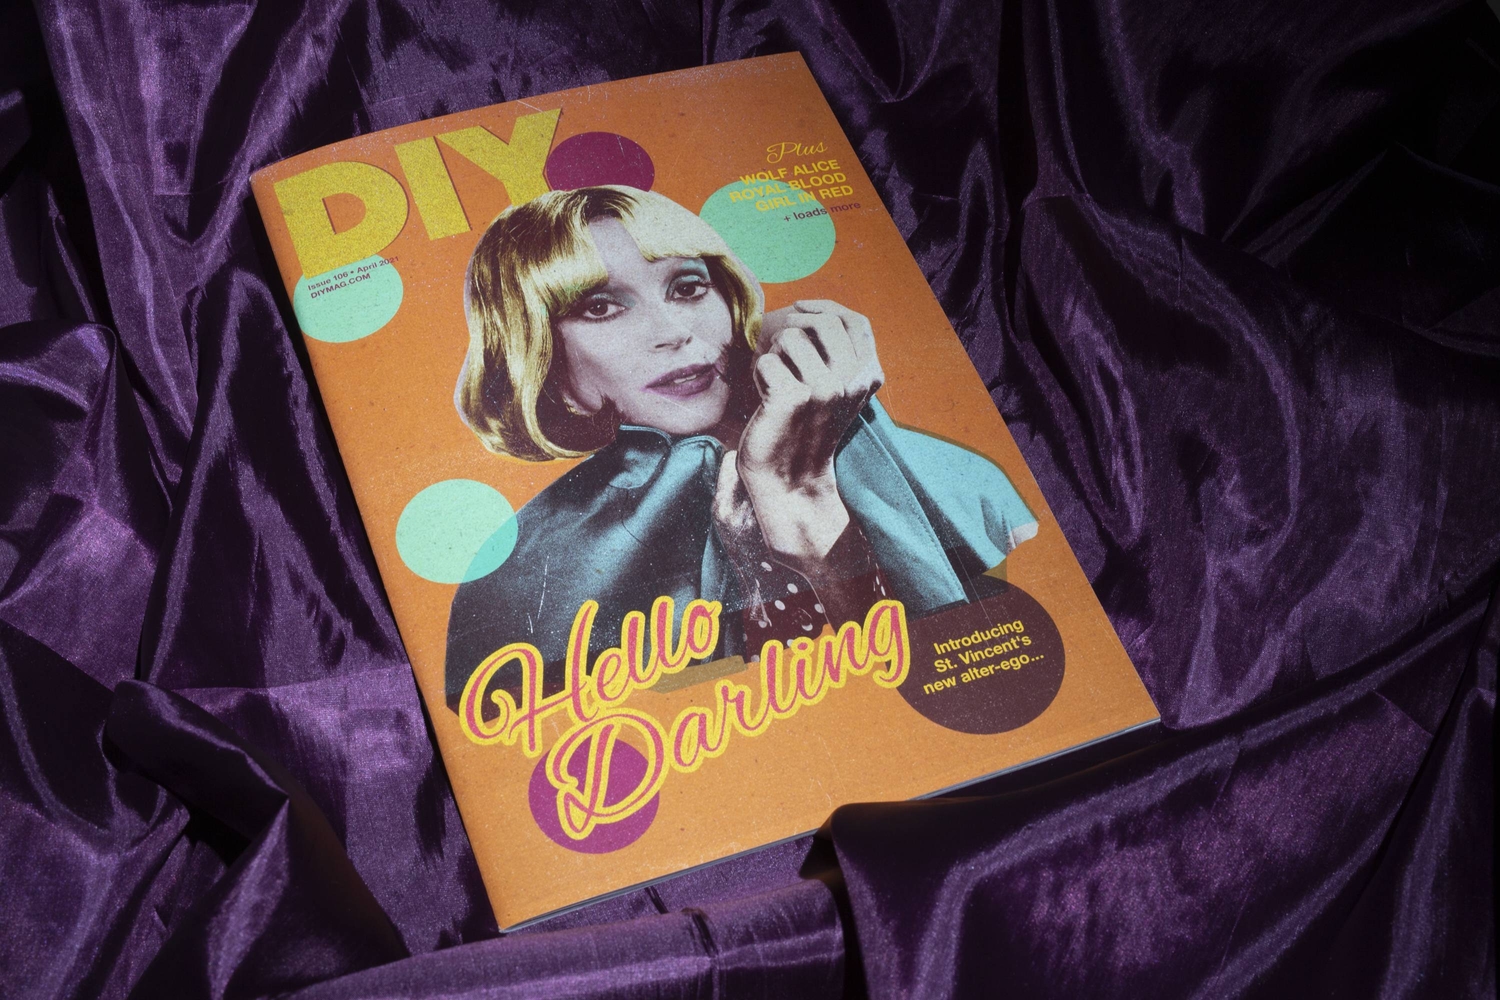 DIY's April 2021 issue - feat. St. Vincent, Royal Blood, Wolf Alice & more - is out now!